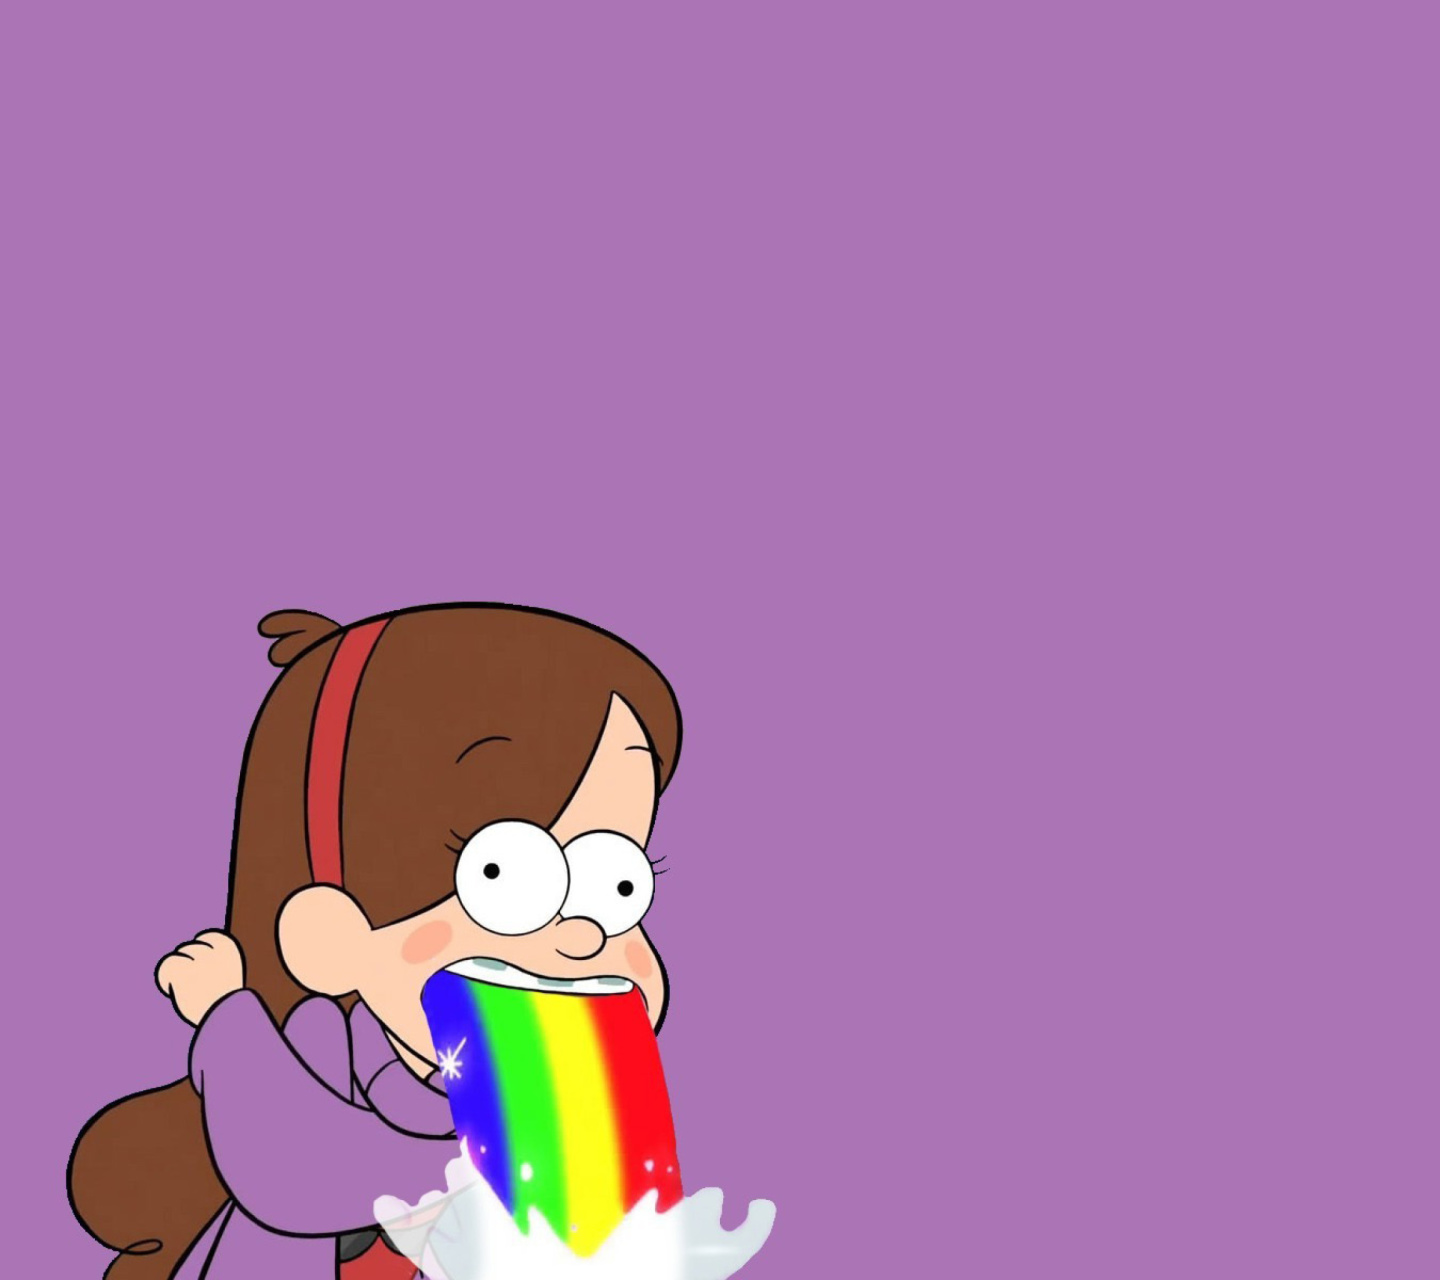 Mabel in Gravity Falls Wallpaper for Android 720x1280